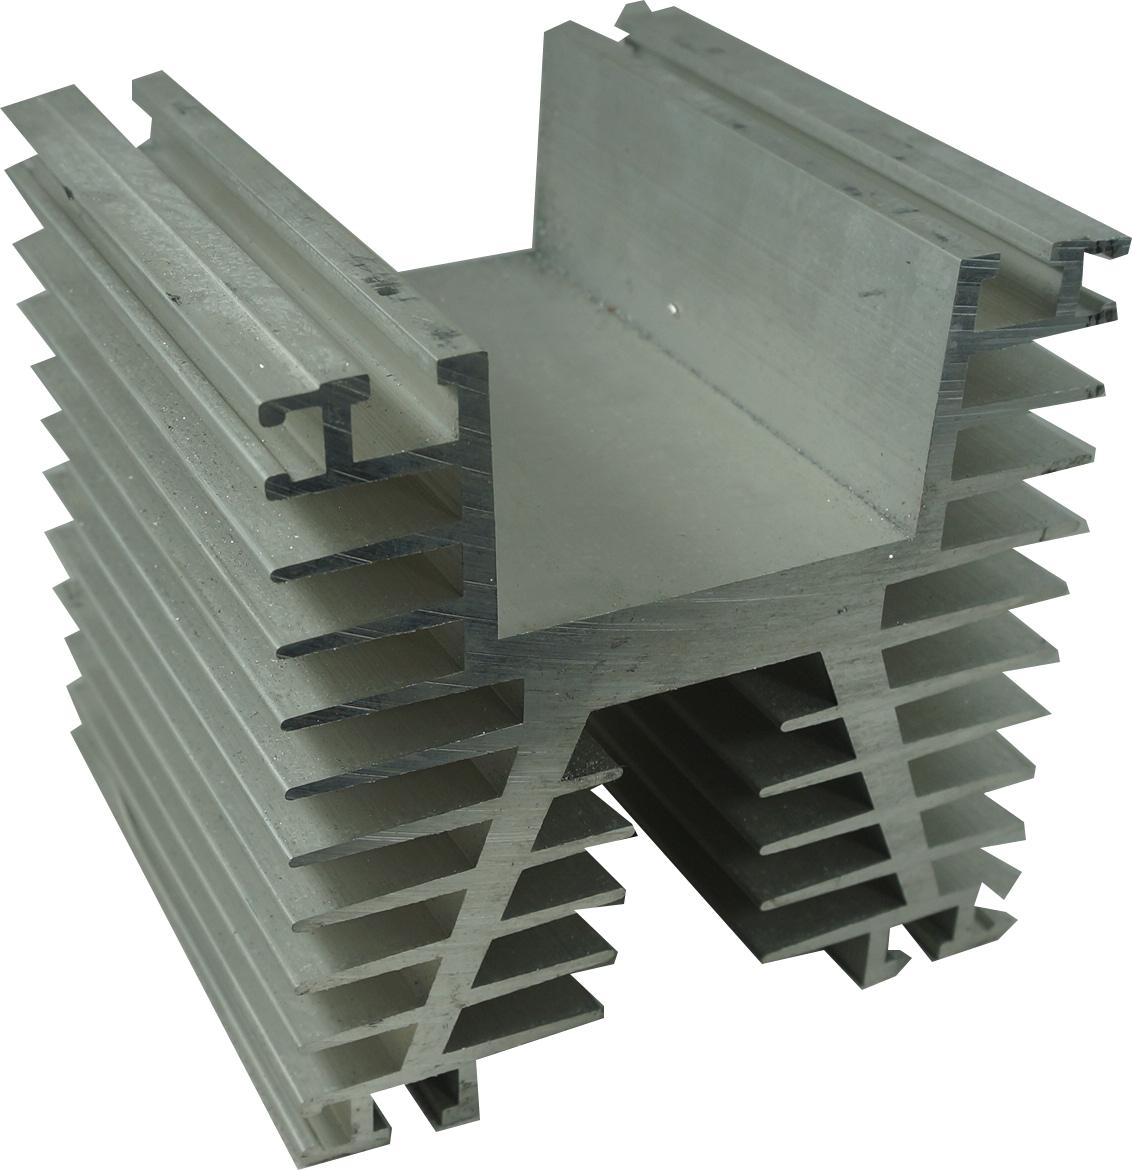 H1 Heatsink, Full Lengths or cut to order Raw Finish only